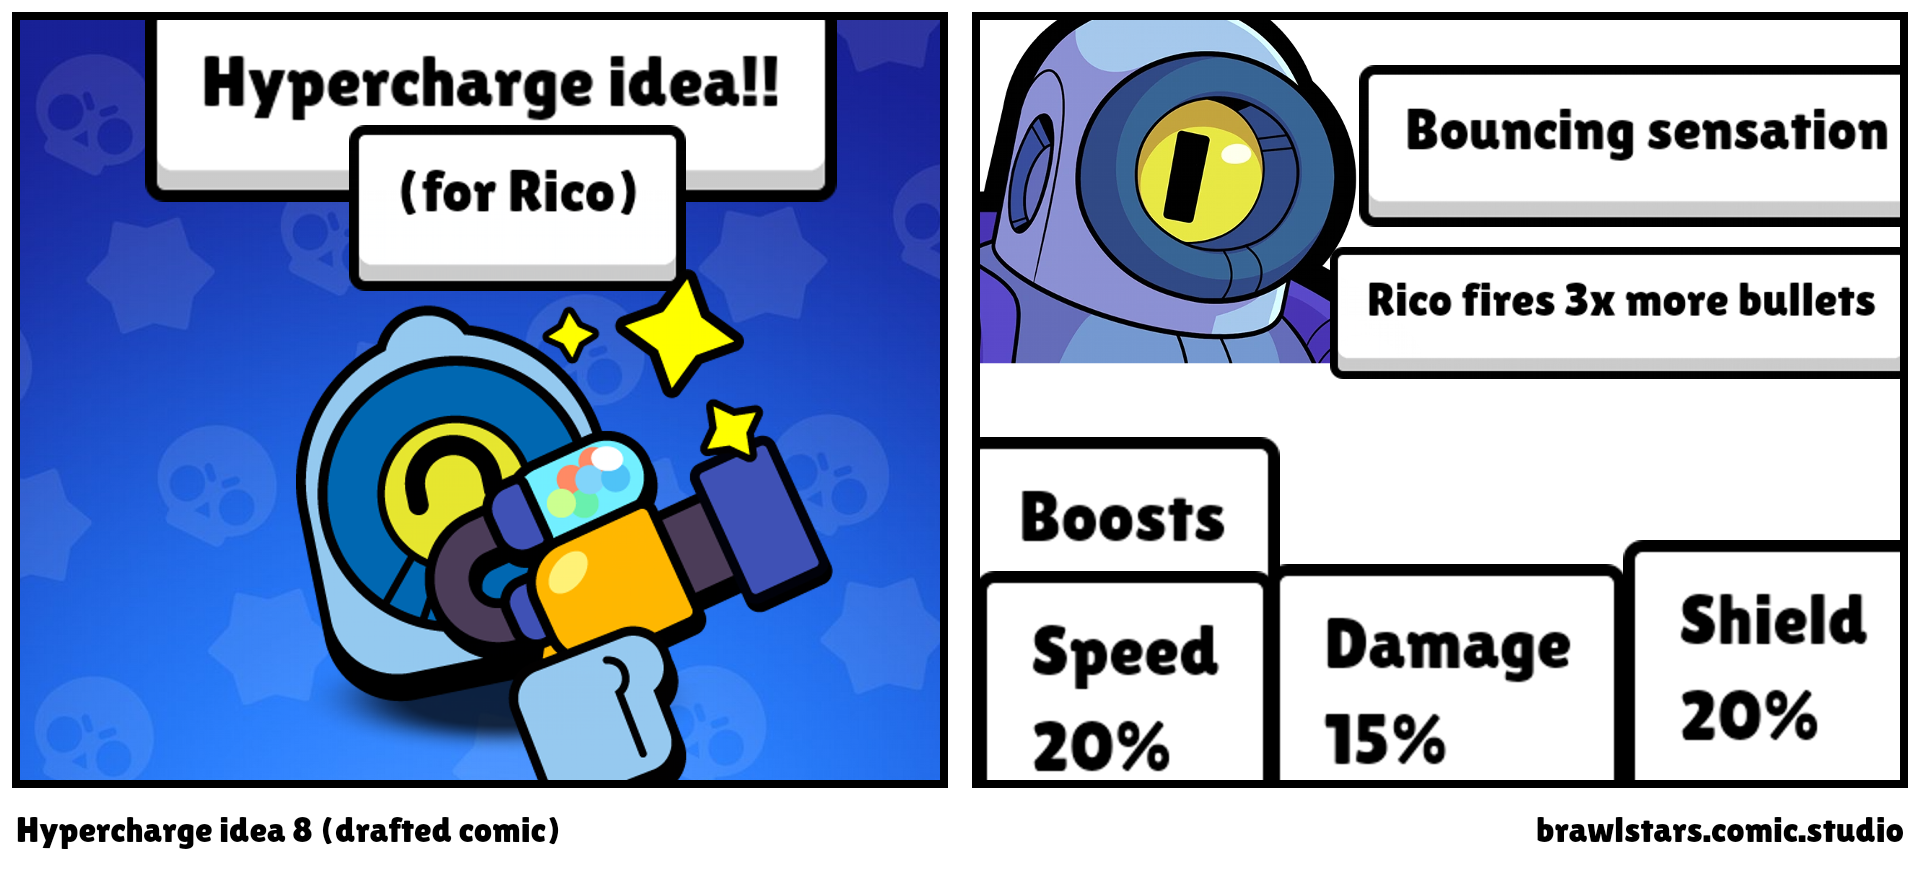 Hypercharge idea 8 (drafted comic)